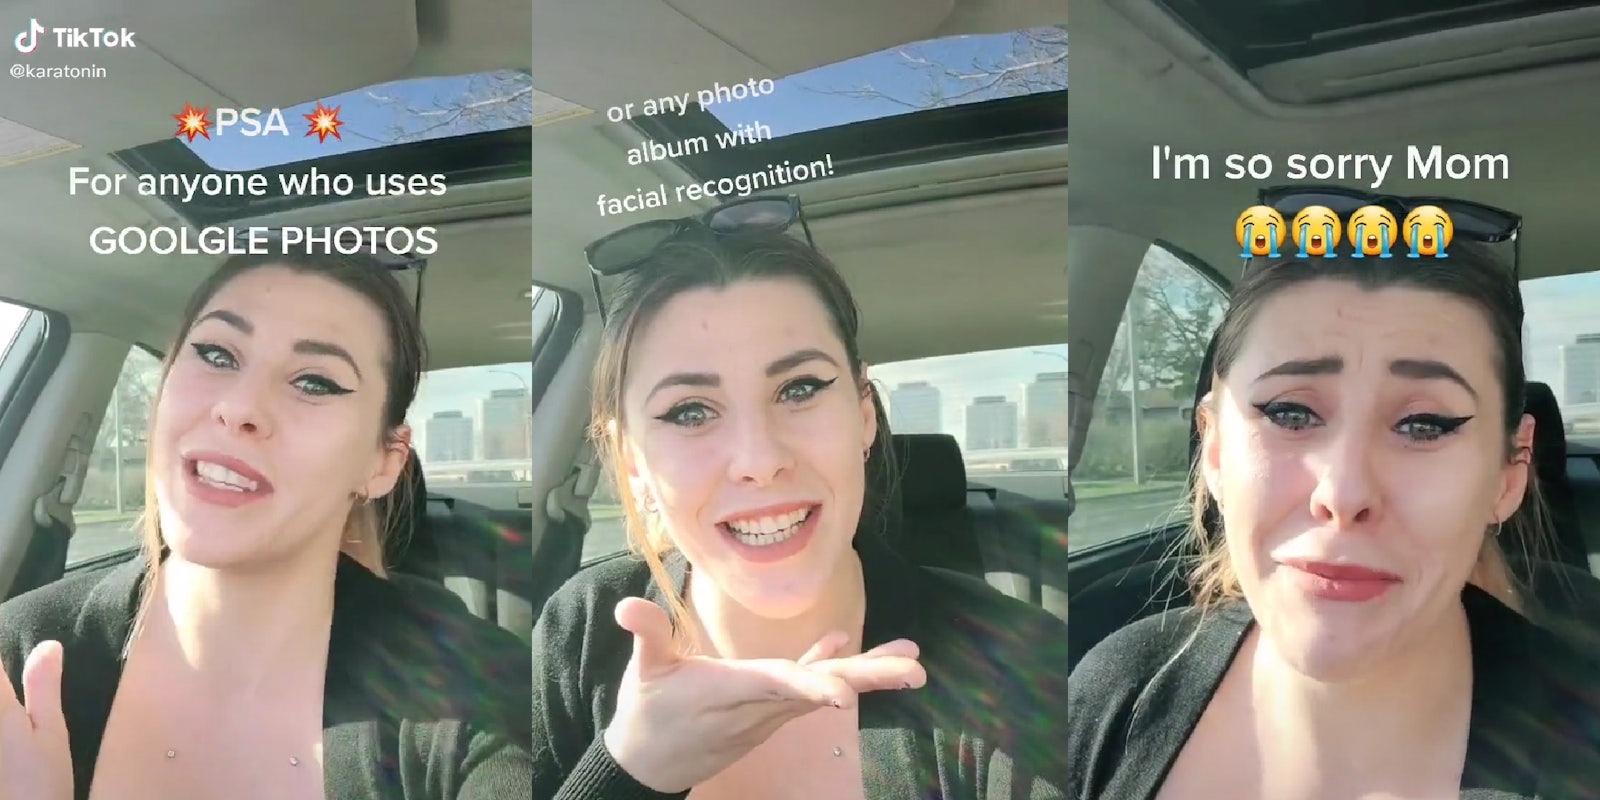 woman in car 'PSA For anyone who uses GOOLGLE PHOTOS or any photo album with facial recognition! I'm so sorry Mom' with crying face emoji